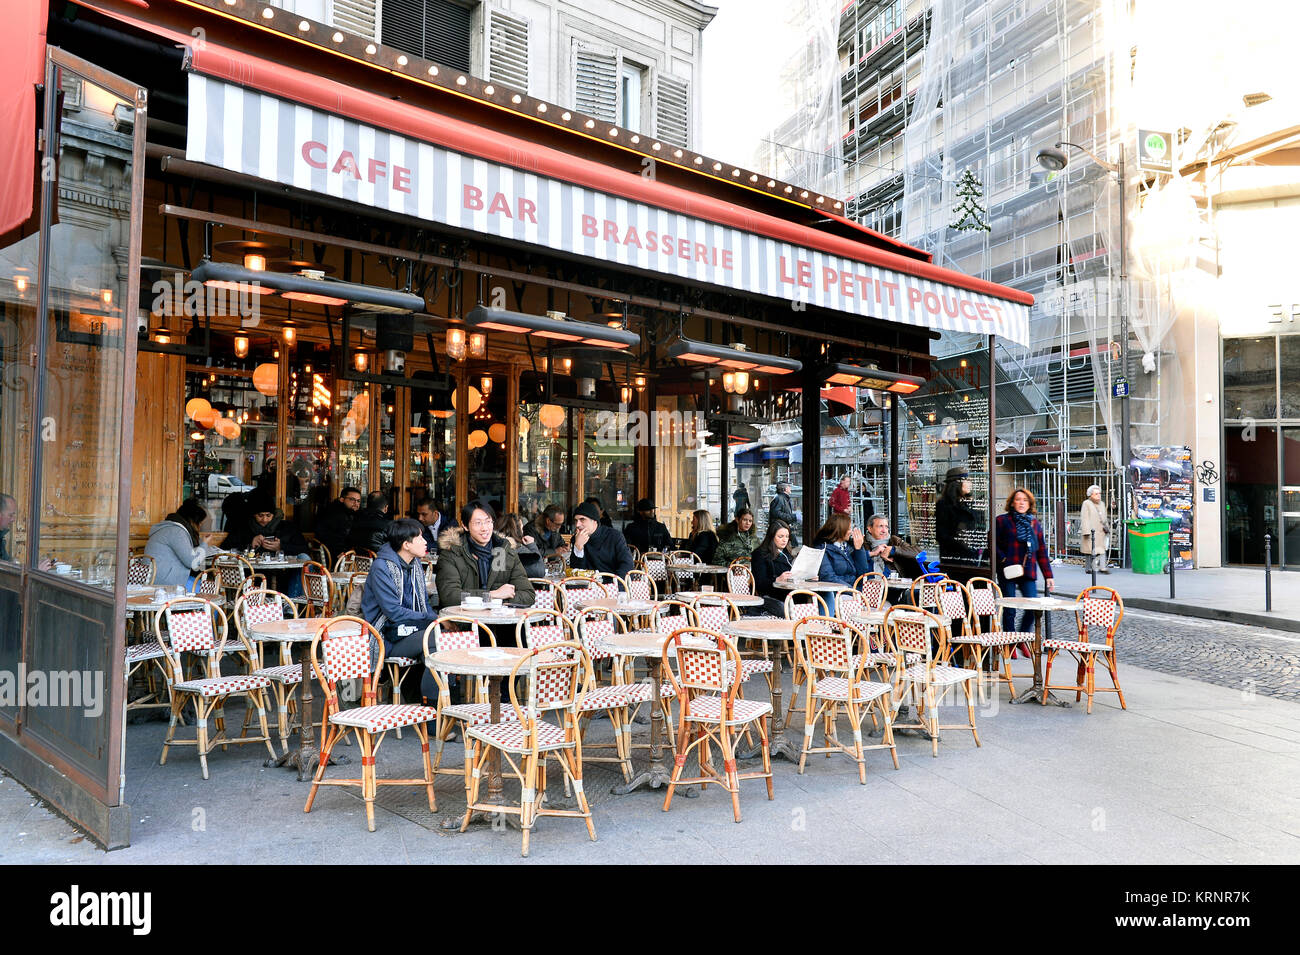 Le petit bistrot hi-res stock photography and images - Alamy